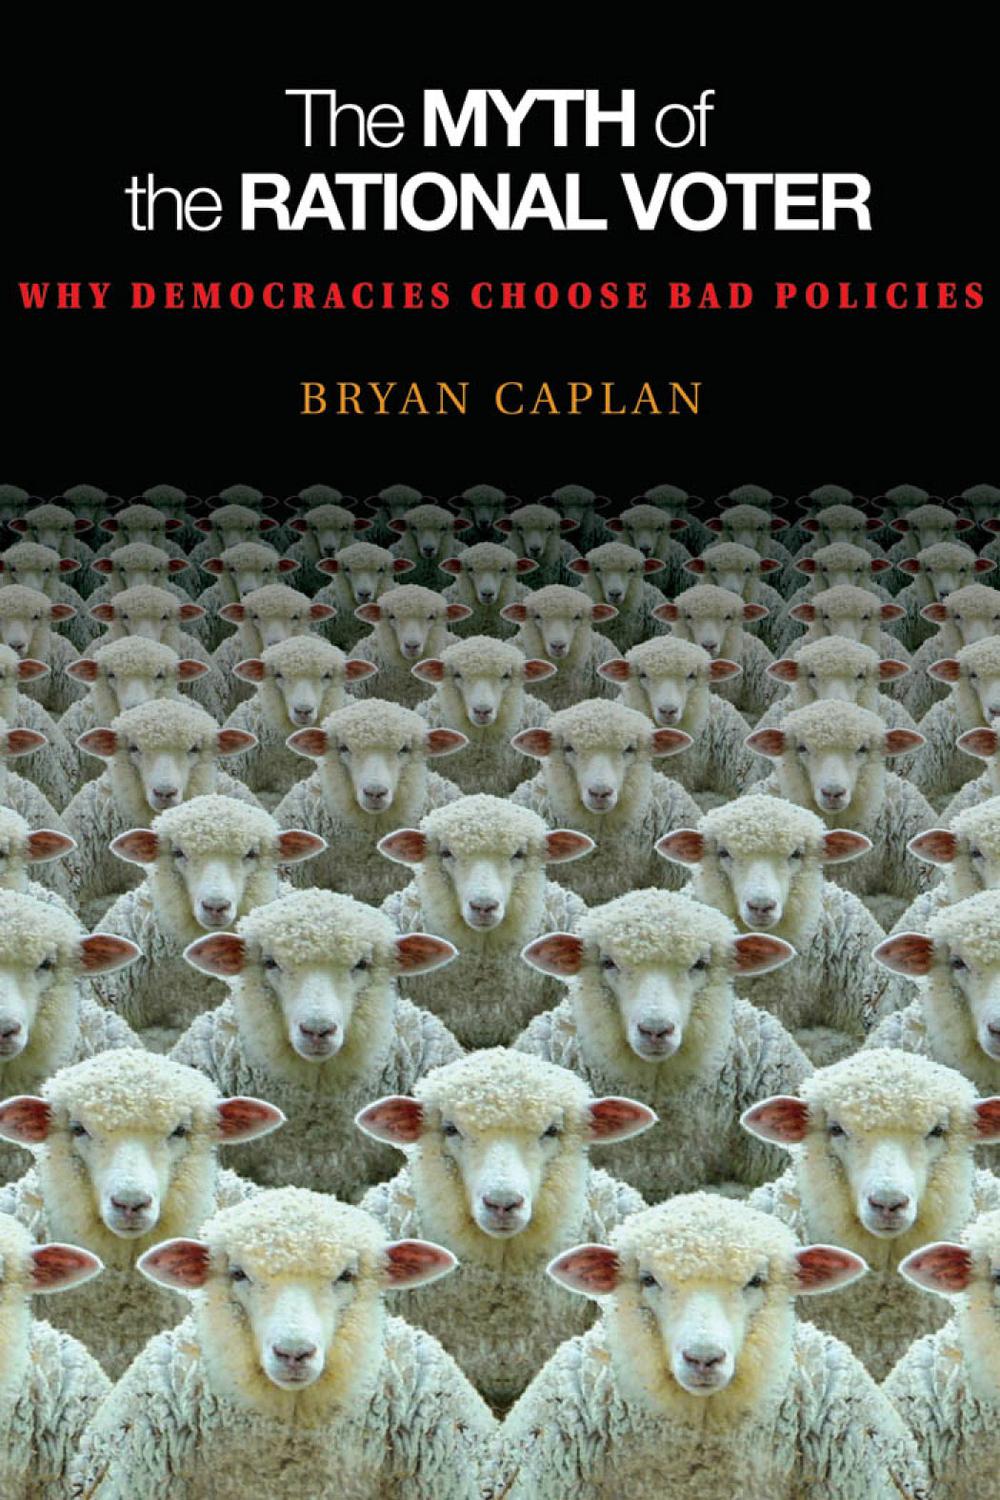 PDF] The Myth of the Rational Voter by Bryan Caplan eBook | Perlego